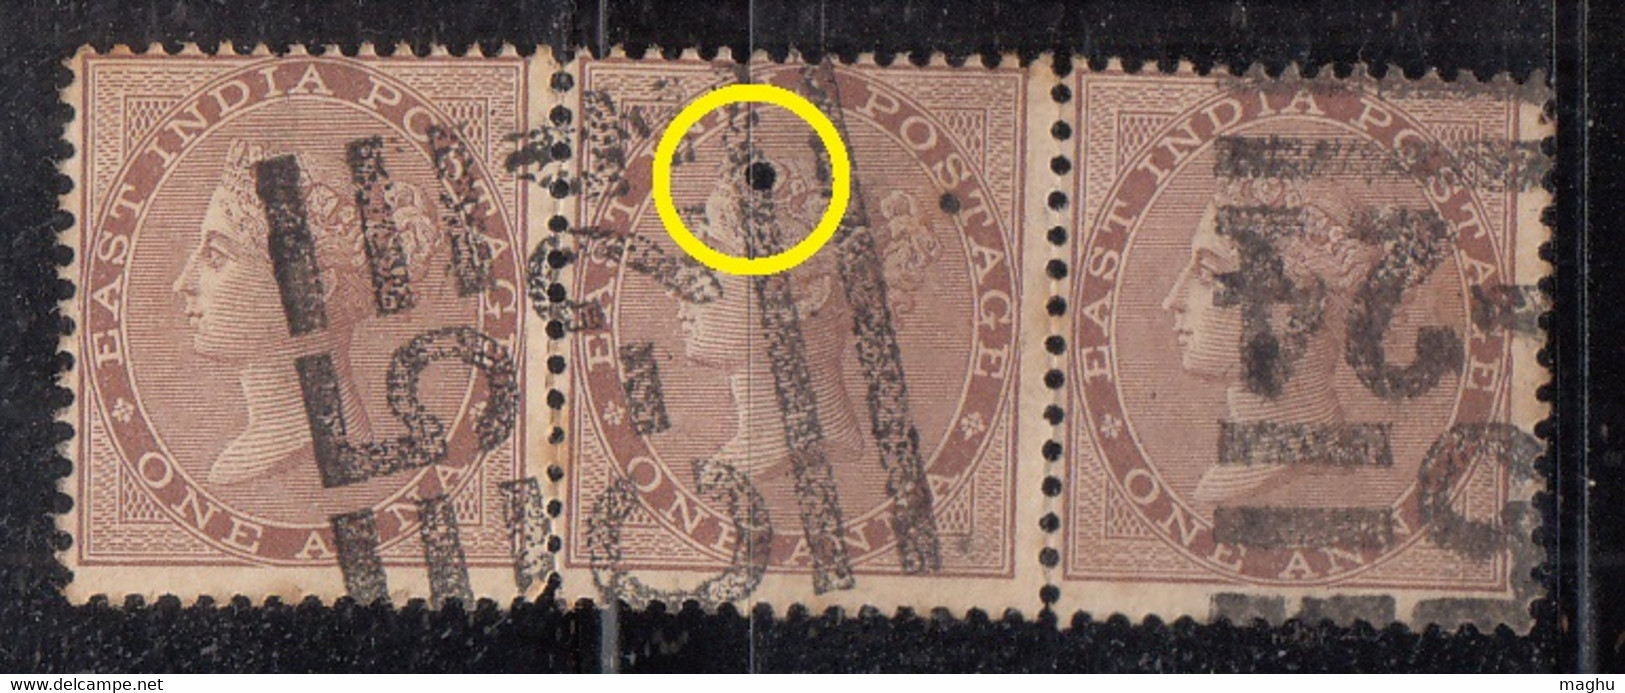 Strip Of 3, Strike Of JC 32c / Martin 17a On SG42  British East India, QV One Anna, Used, No Water Mark 1856 (Pin Hole - 1854 Britse Indische Compagnie